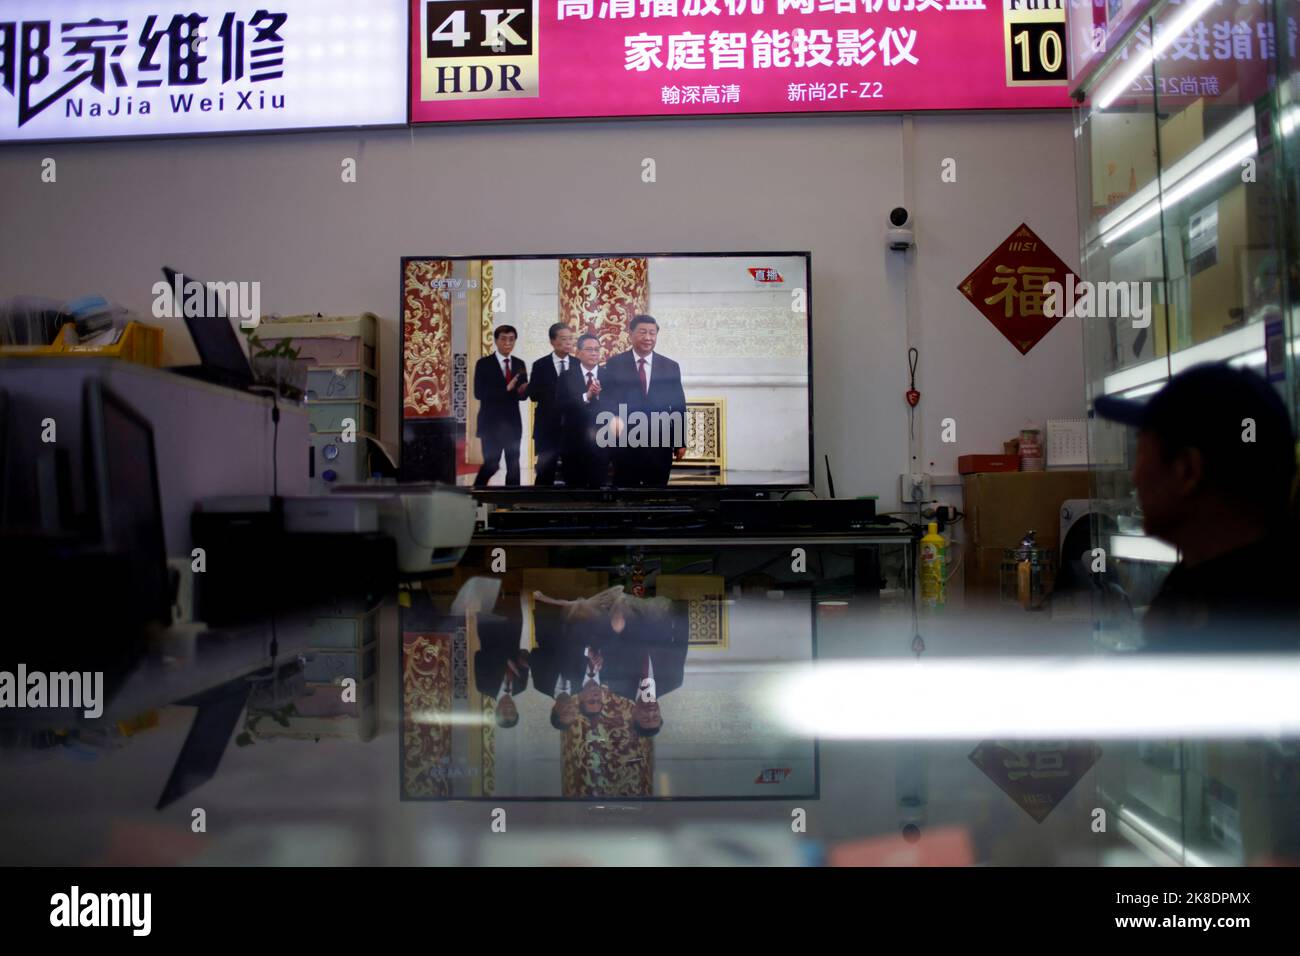 A man watches a television showing footage of Chinese President Xi Jinping and other members of the new Politburo Standing Committee meeting the media following the 20th National Congress of the Communist Party of China, at a store in Shanghai, China October 23, 2022. REUTERS/Aly Song Stock Photo